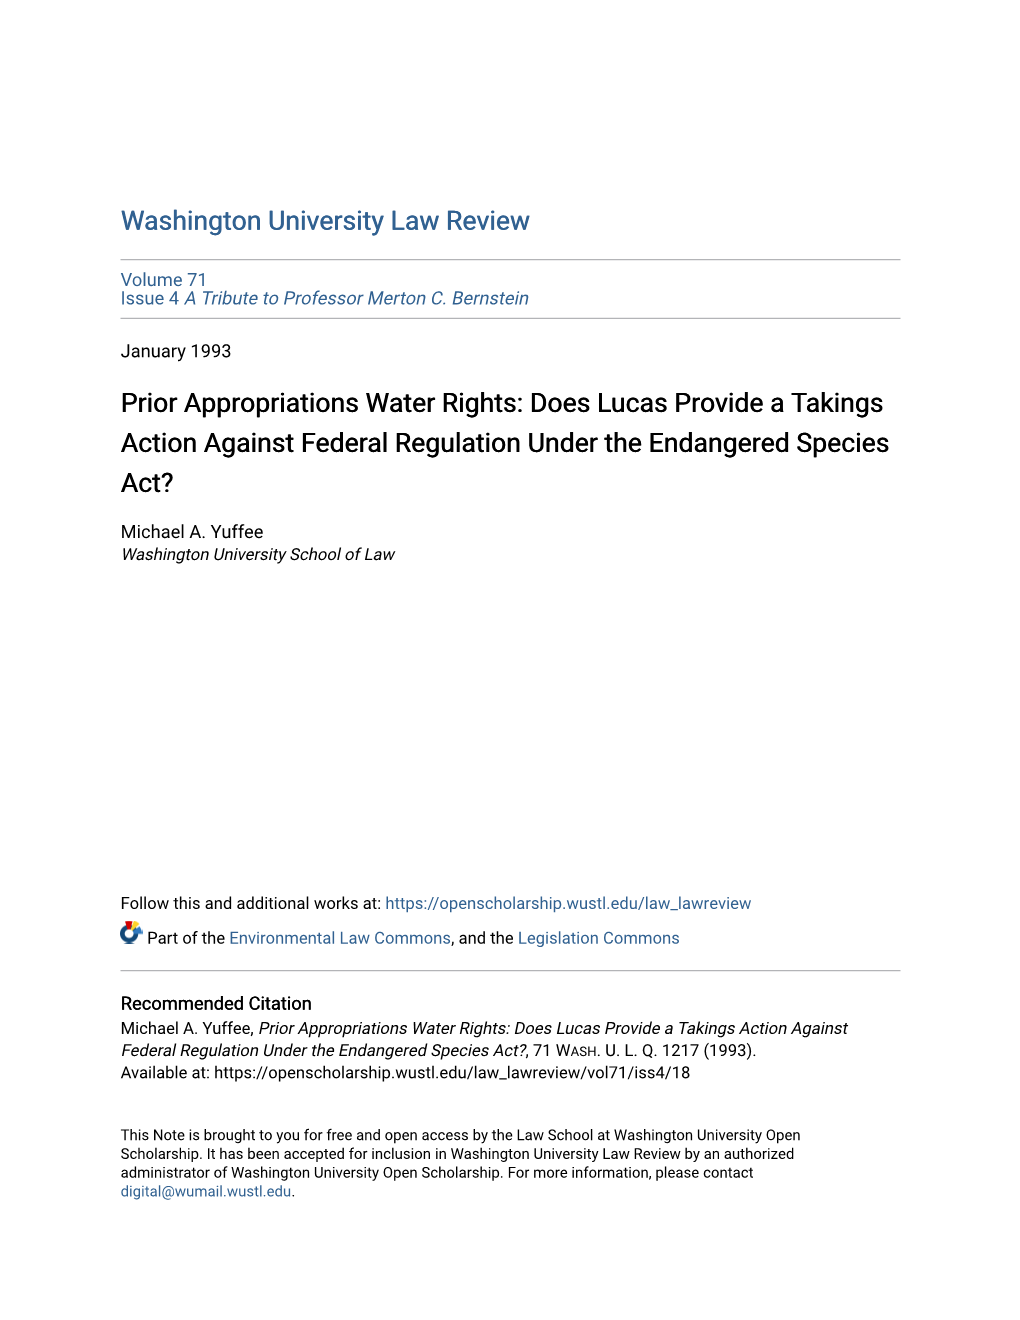 Prior Appropriations Water Rights: Does Lucas Provide a Takings Action Against Federal Regulation Under the Endangered Species Act?